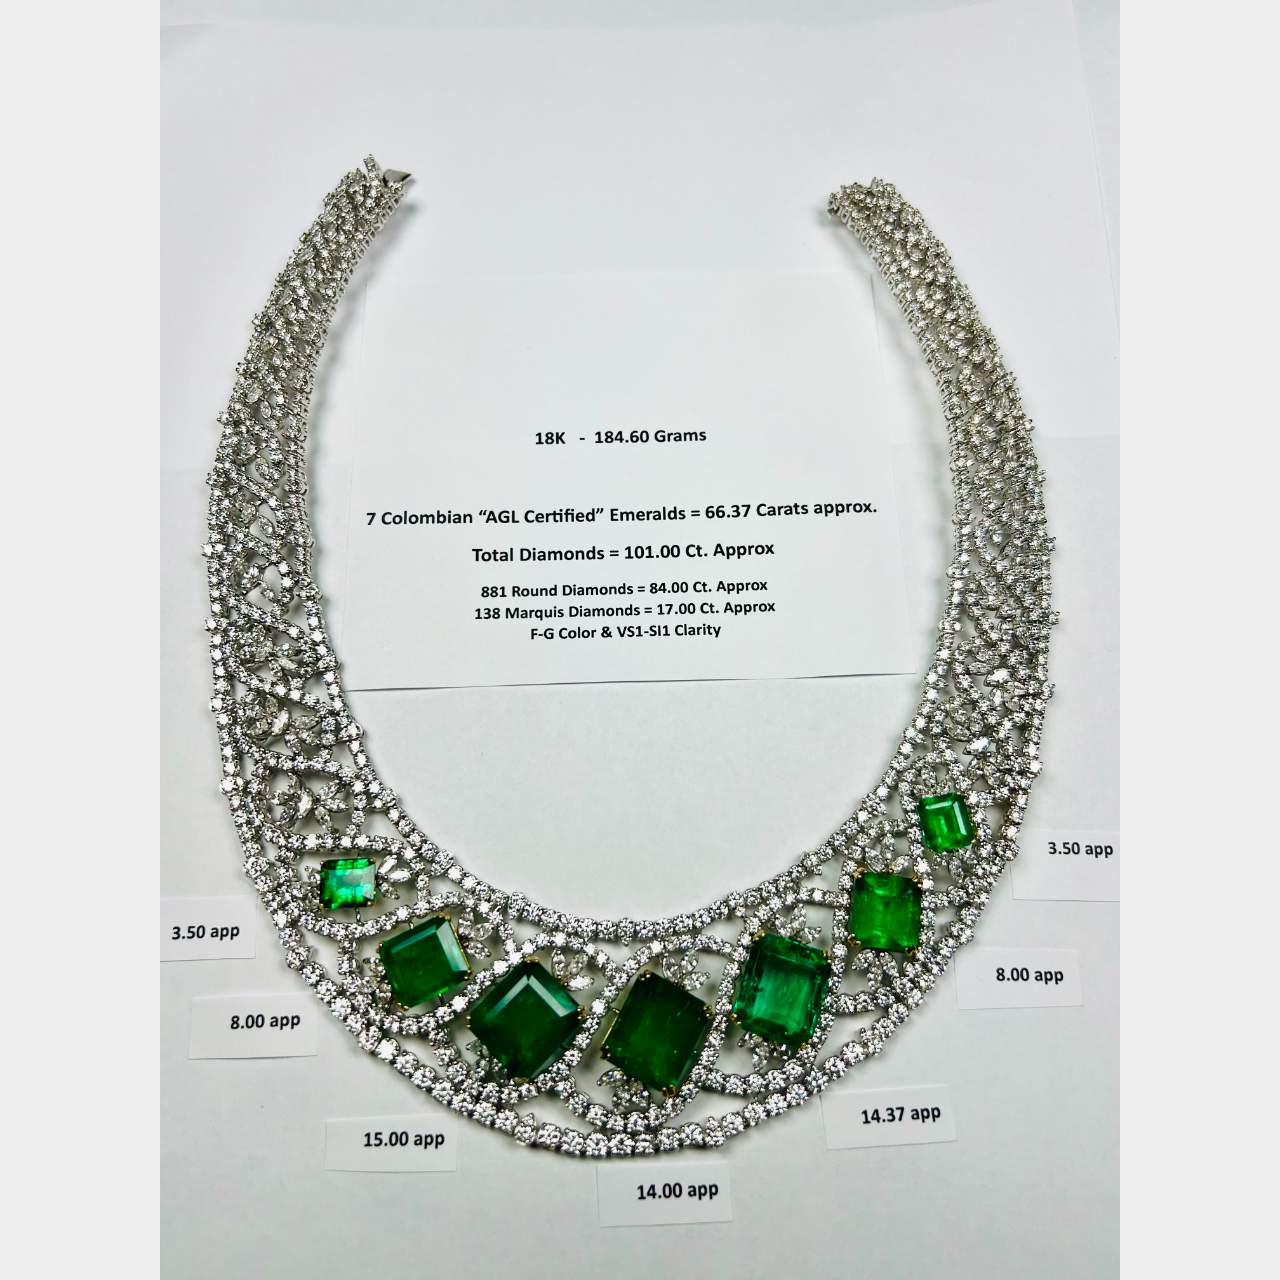 Real 925 Silver Green Emerald Diamond Ring Pendant Necklace Earrings  Jewelry Set